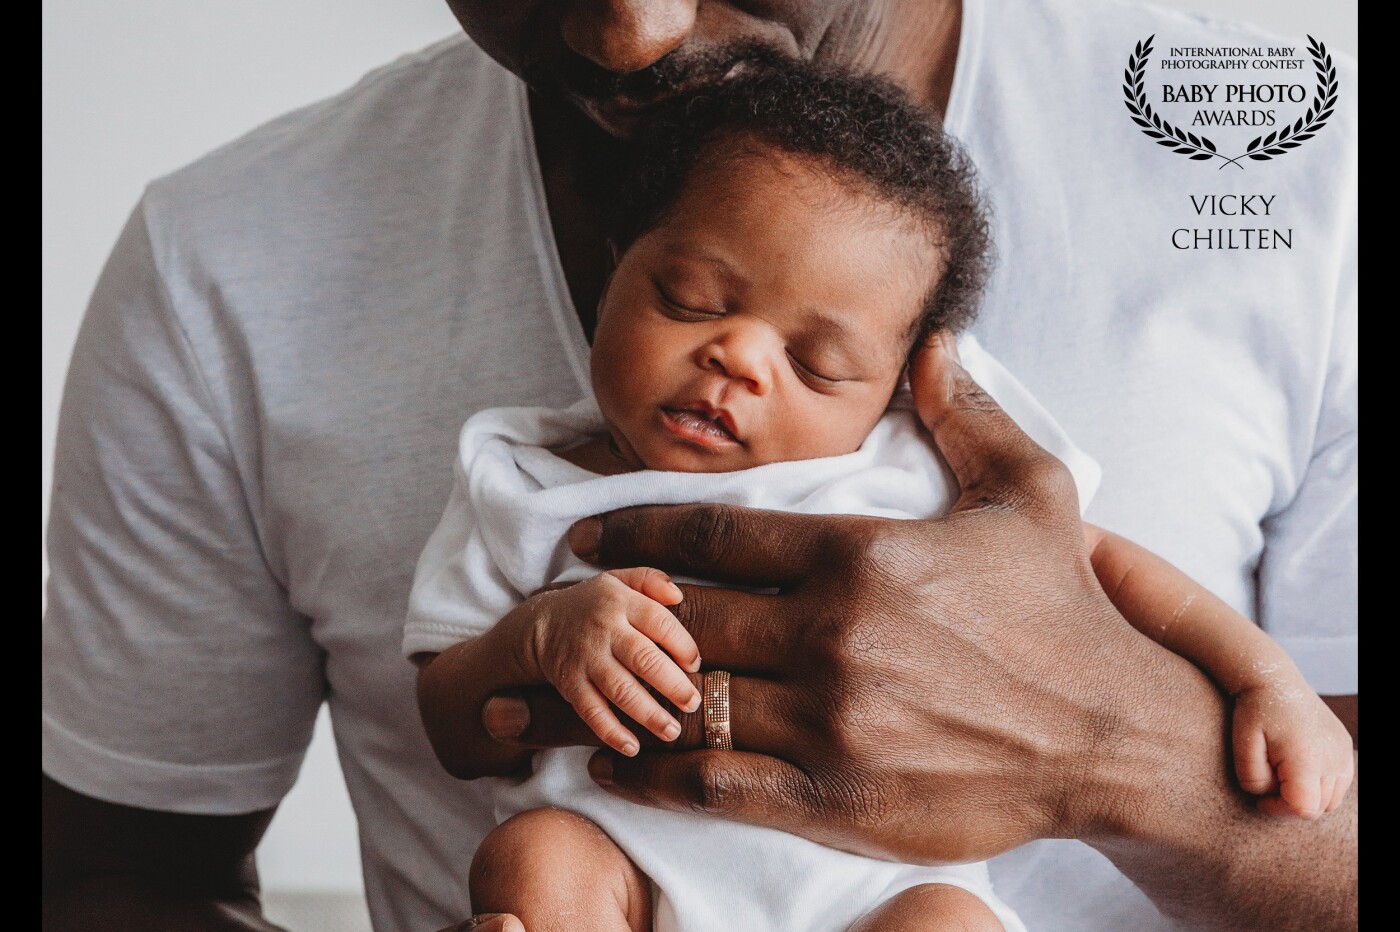 Daddy was holding his newborn daughter with such ease and love, I just had them turn slightly towards the window and there it was, such a special moment to capture! Sometimes things just fall into place perfectly. <br />
This is from a lifestyle in-home newborn session, my favourite.